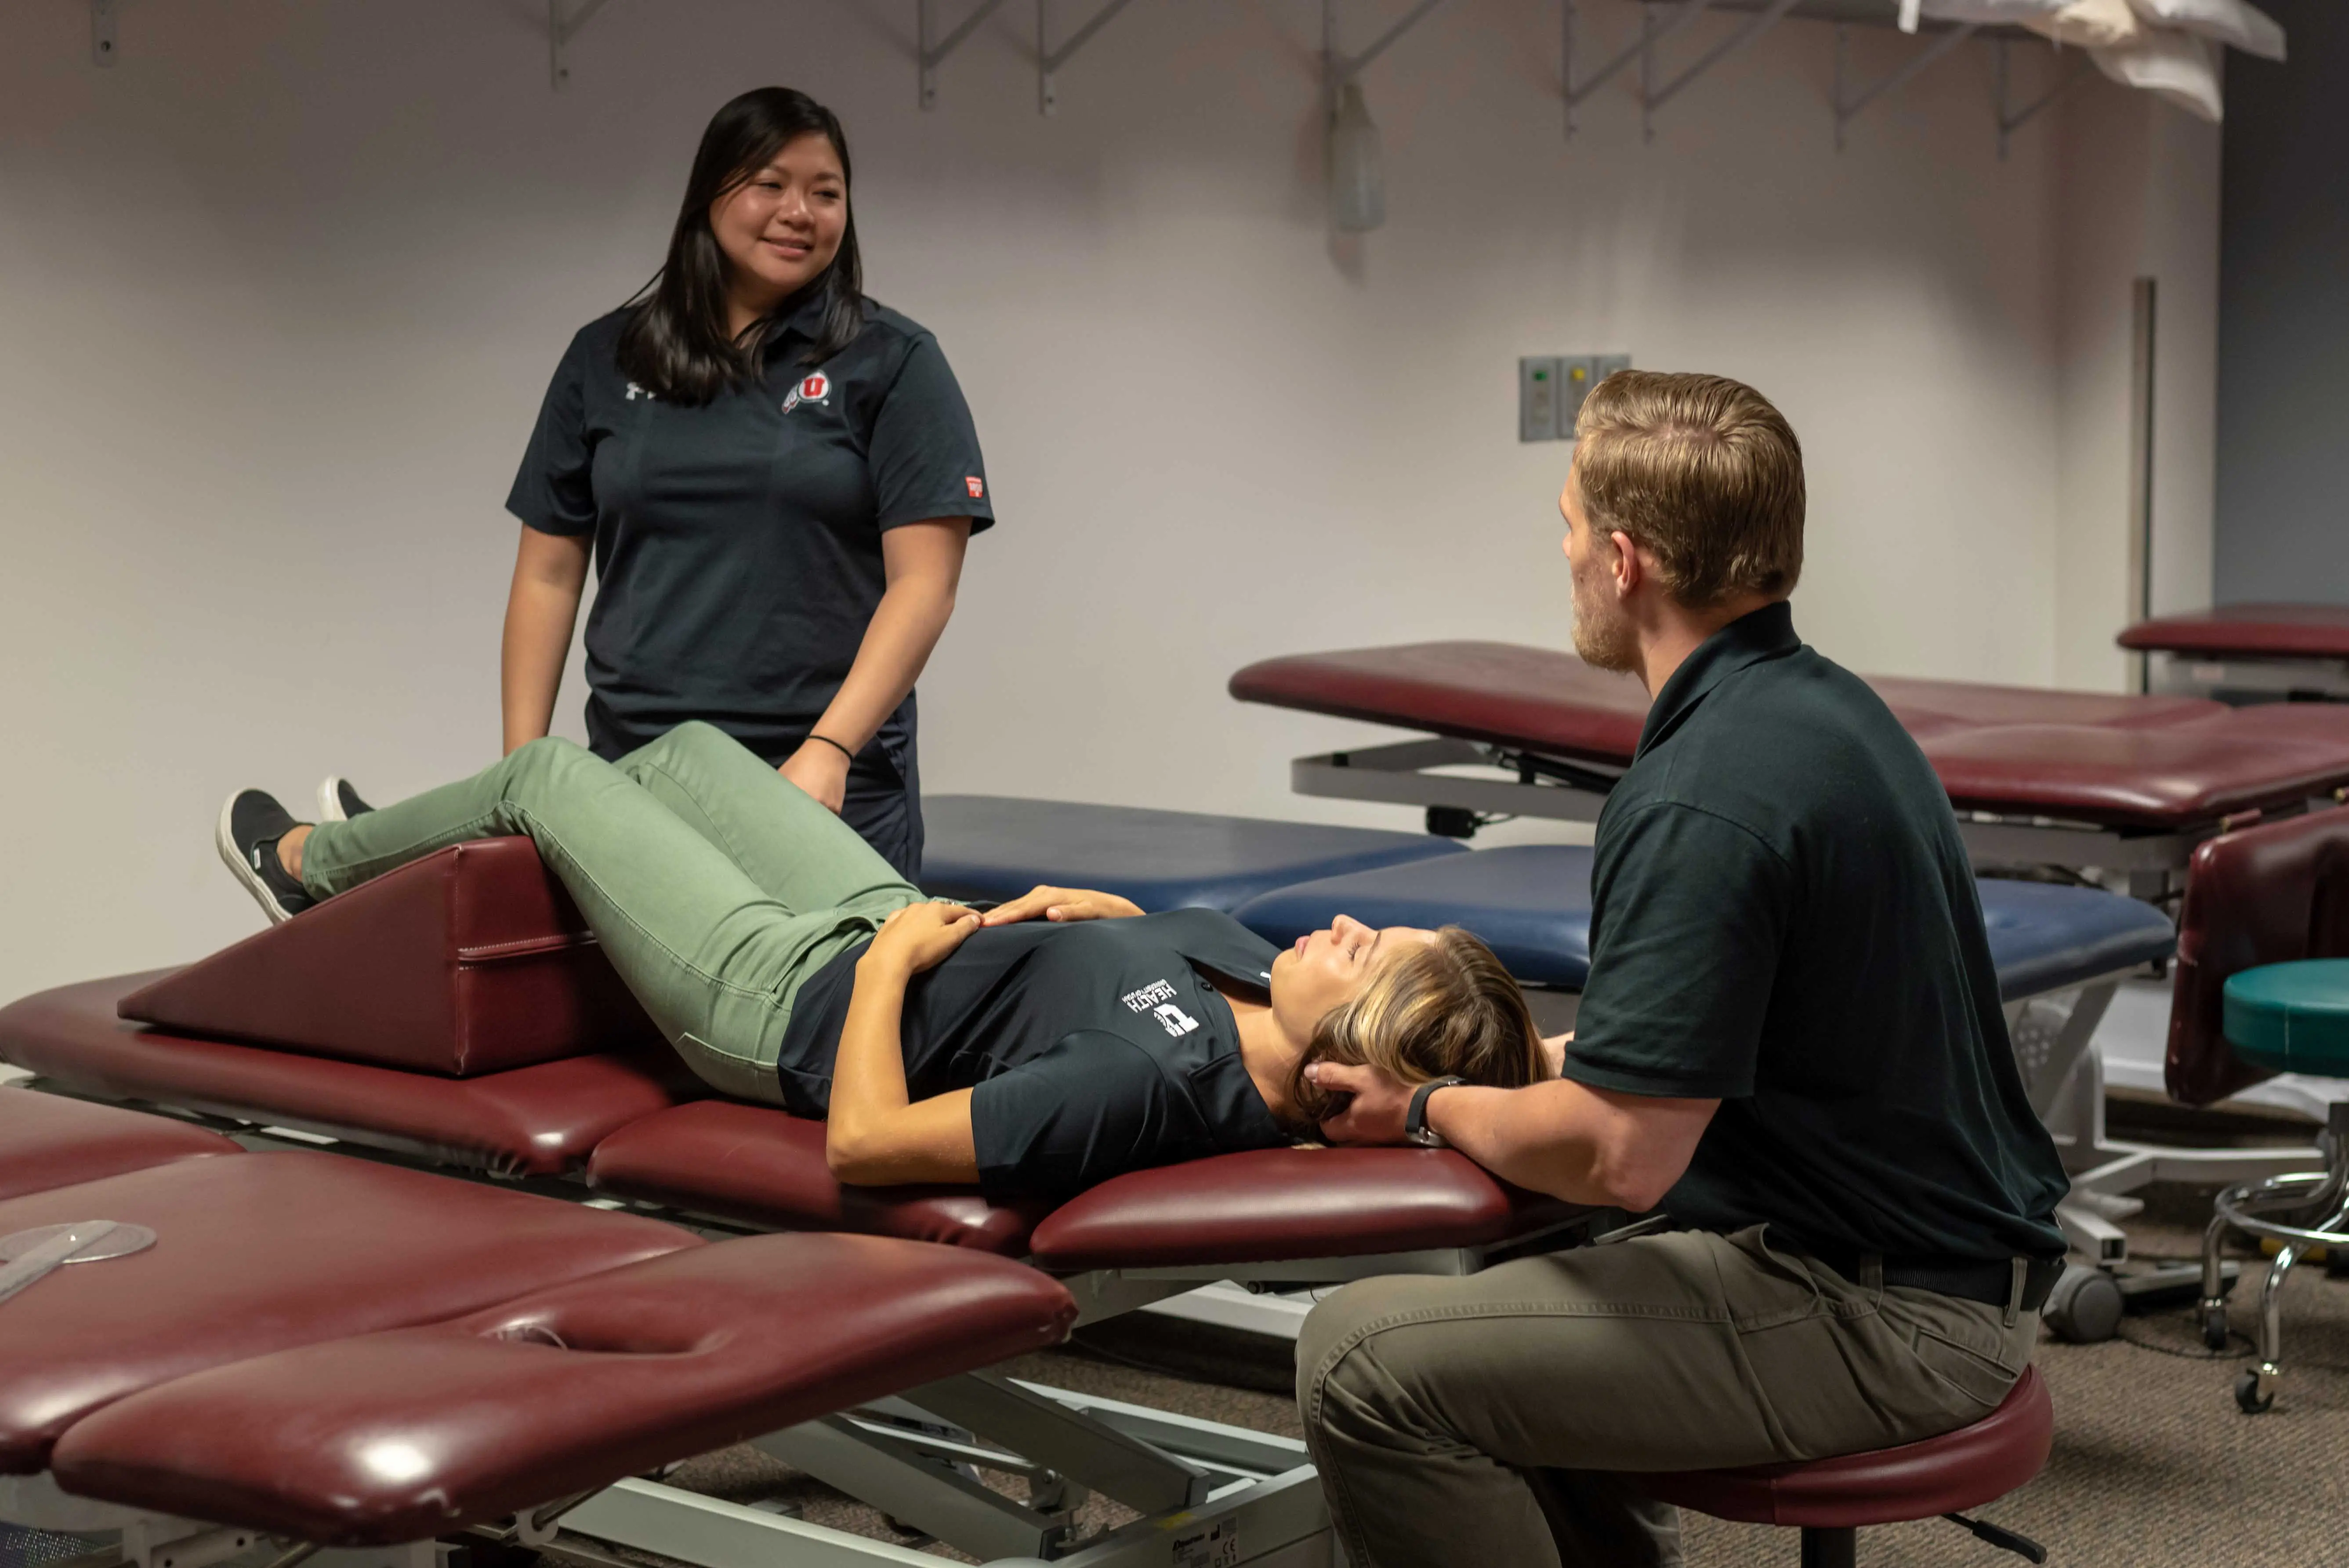 Hands-on learning for DPT students